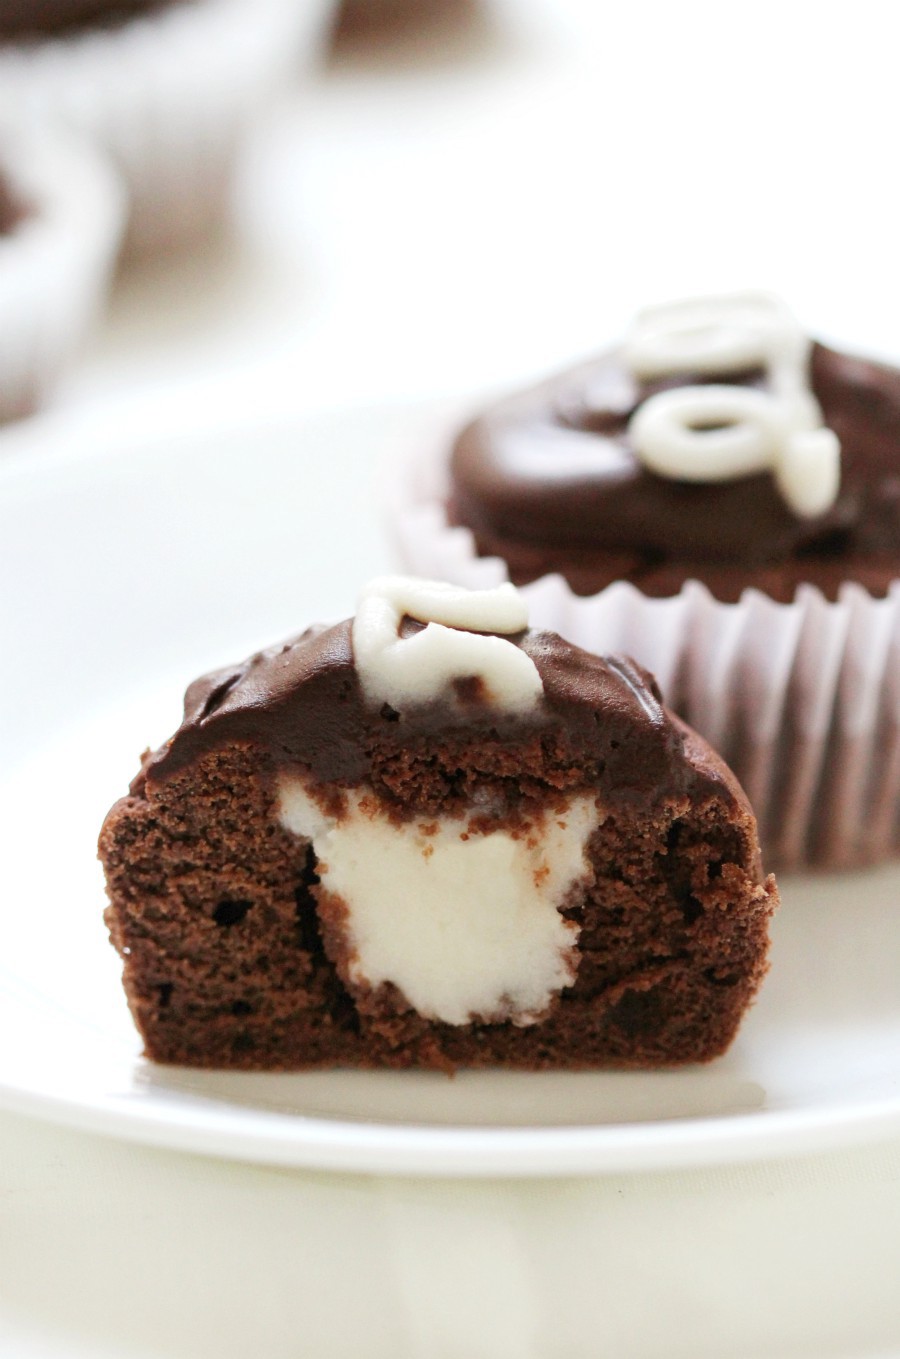 Homemade Gluten-Free + Vegan Hostess Cupcakes (Allergy-Free) | Strength and Sunshine @RebeccaGF666 A copycat recipe for your favorite American snack cake! Homemade Gluten-Free & Vegan Hostess Cupcakes that are top-8 allergy-free and a whole lot healthier! A chocolate cream-filled dessert for any occasion that is bound to bring back all the nostalgia of childhood! #glutenfree #vegan #cupcakes #hostesscupcakes #allergyfree